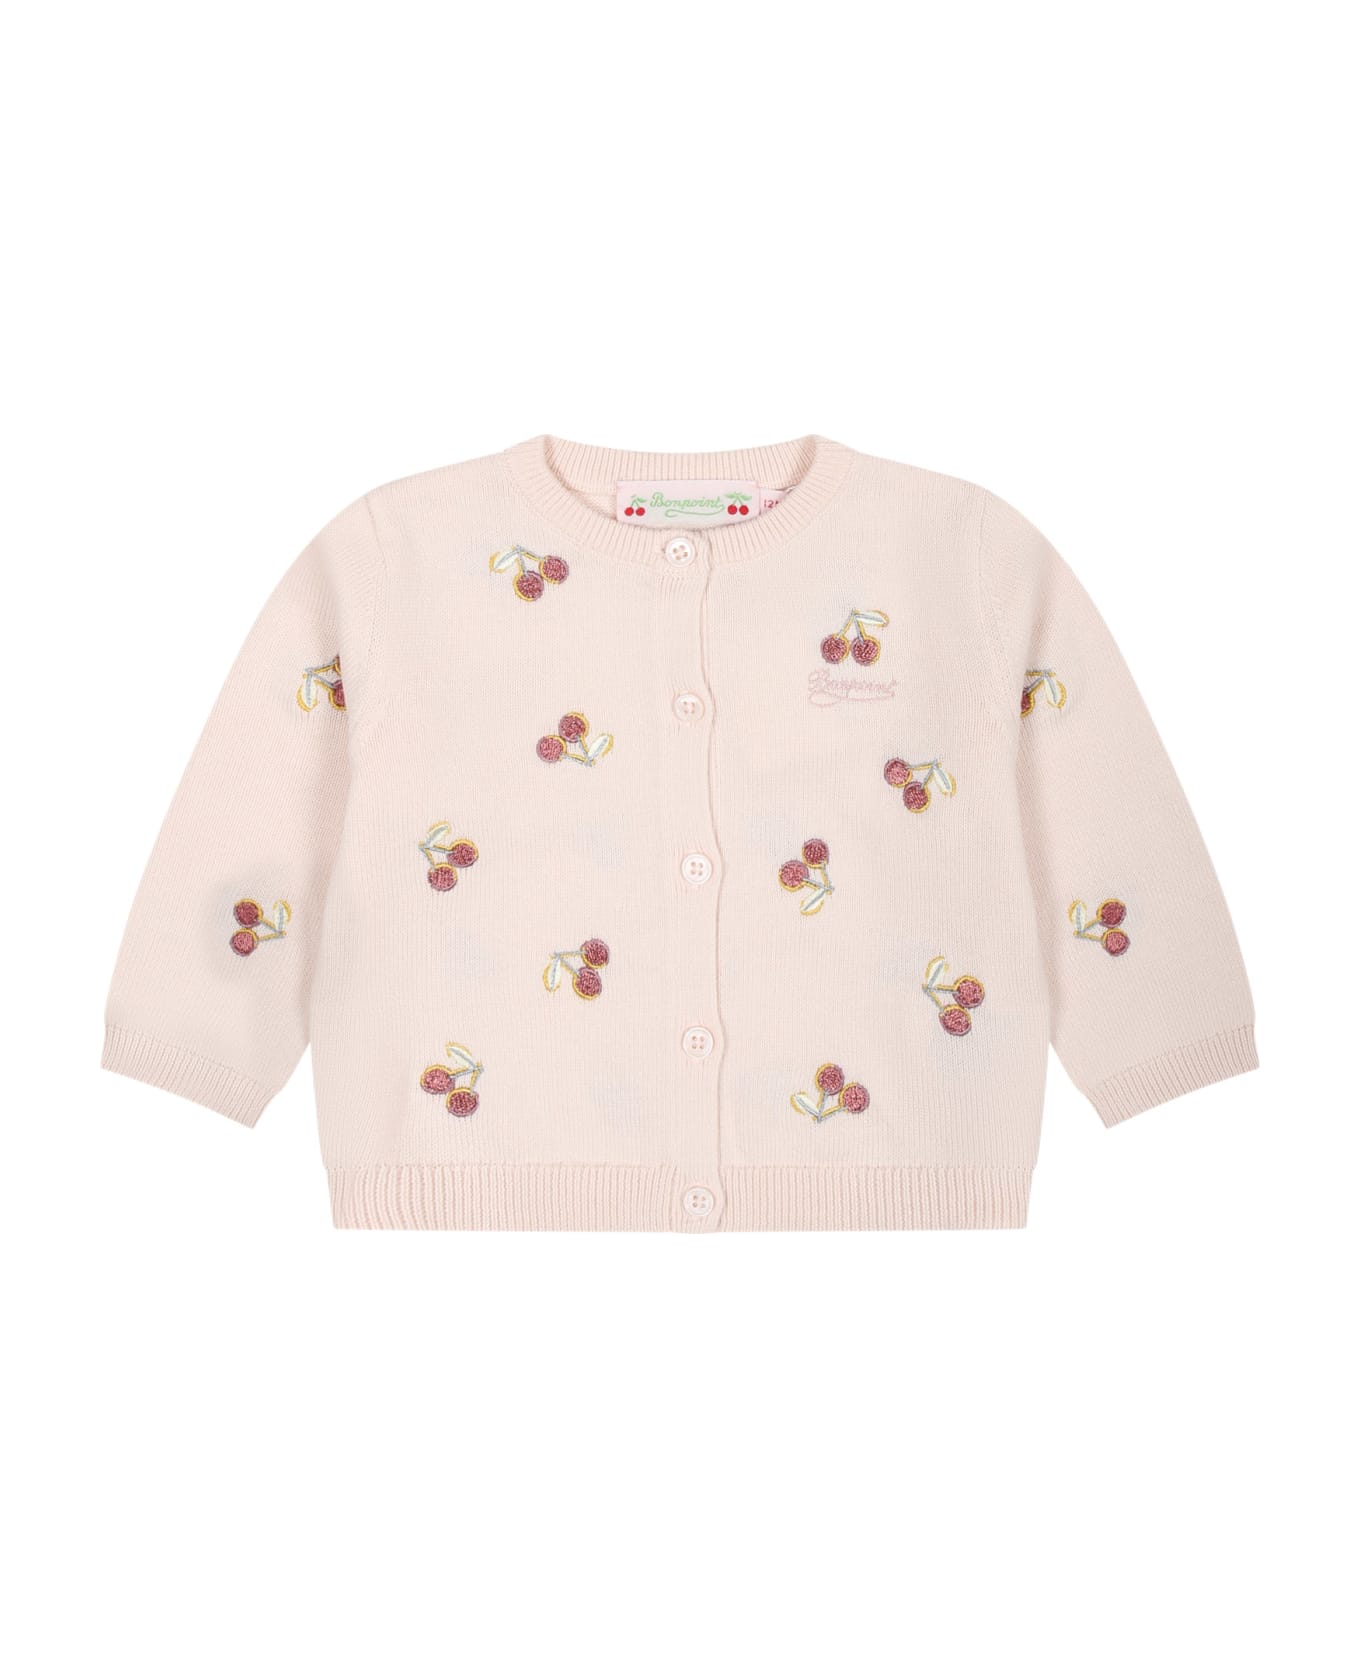 Bonpoint Pink Cardigan For Baby Girl With Cherries - Rosa